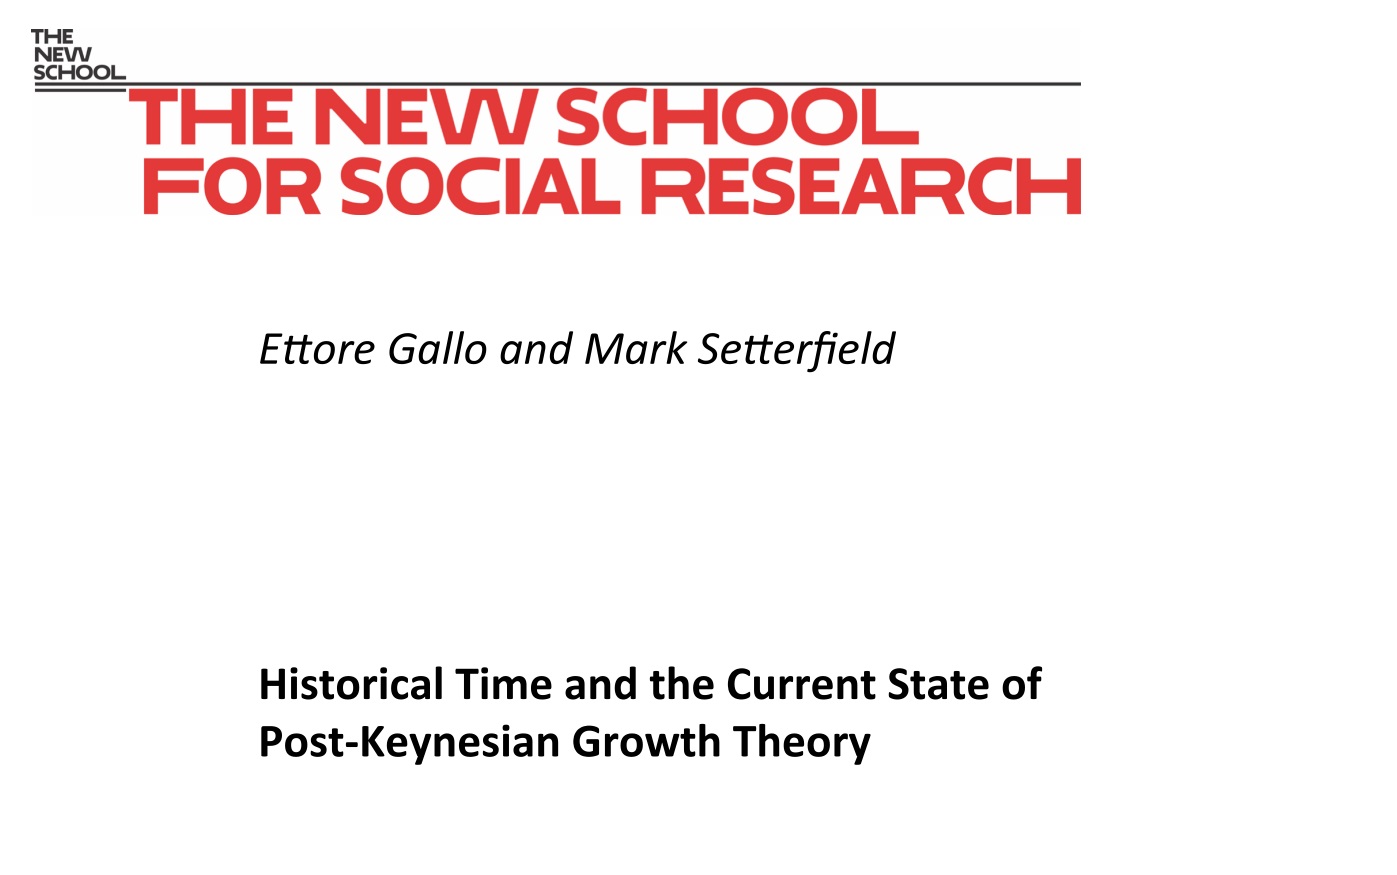 Working Paper - Historical Time and the Current State of Post-Keynesian Growth Theory